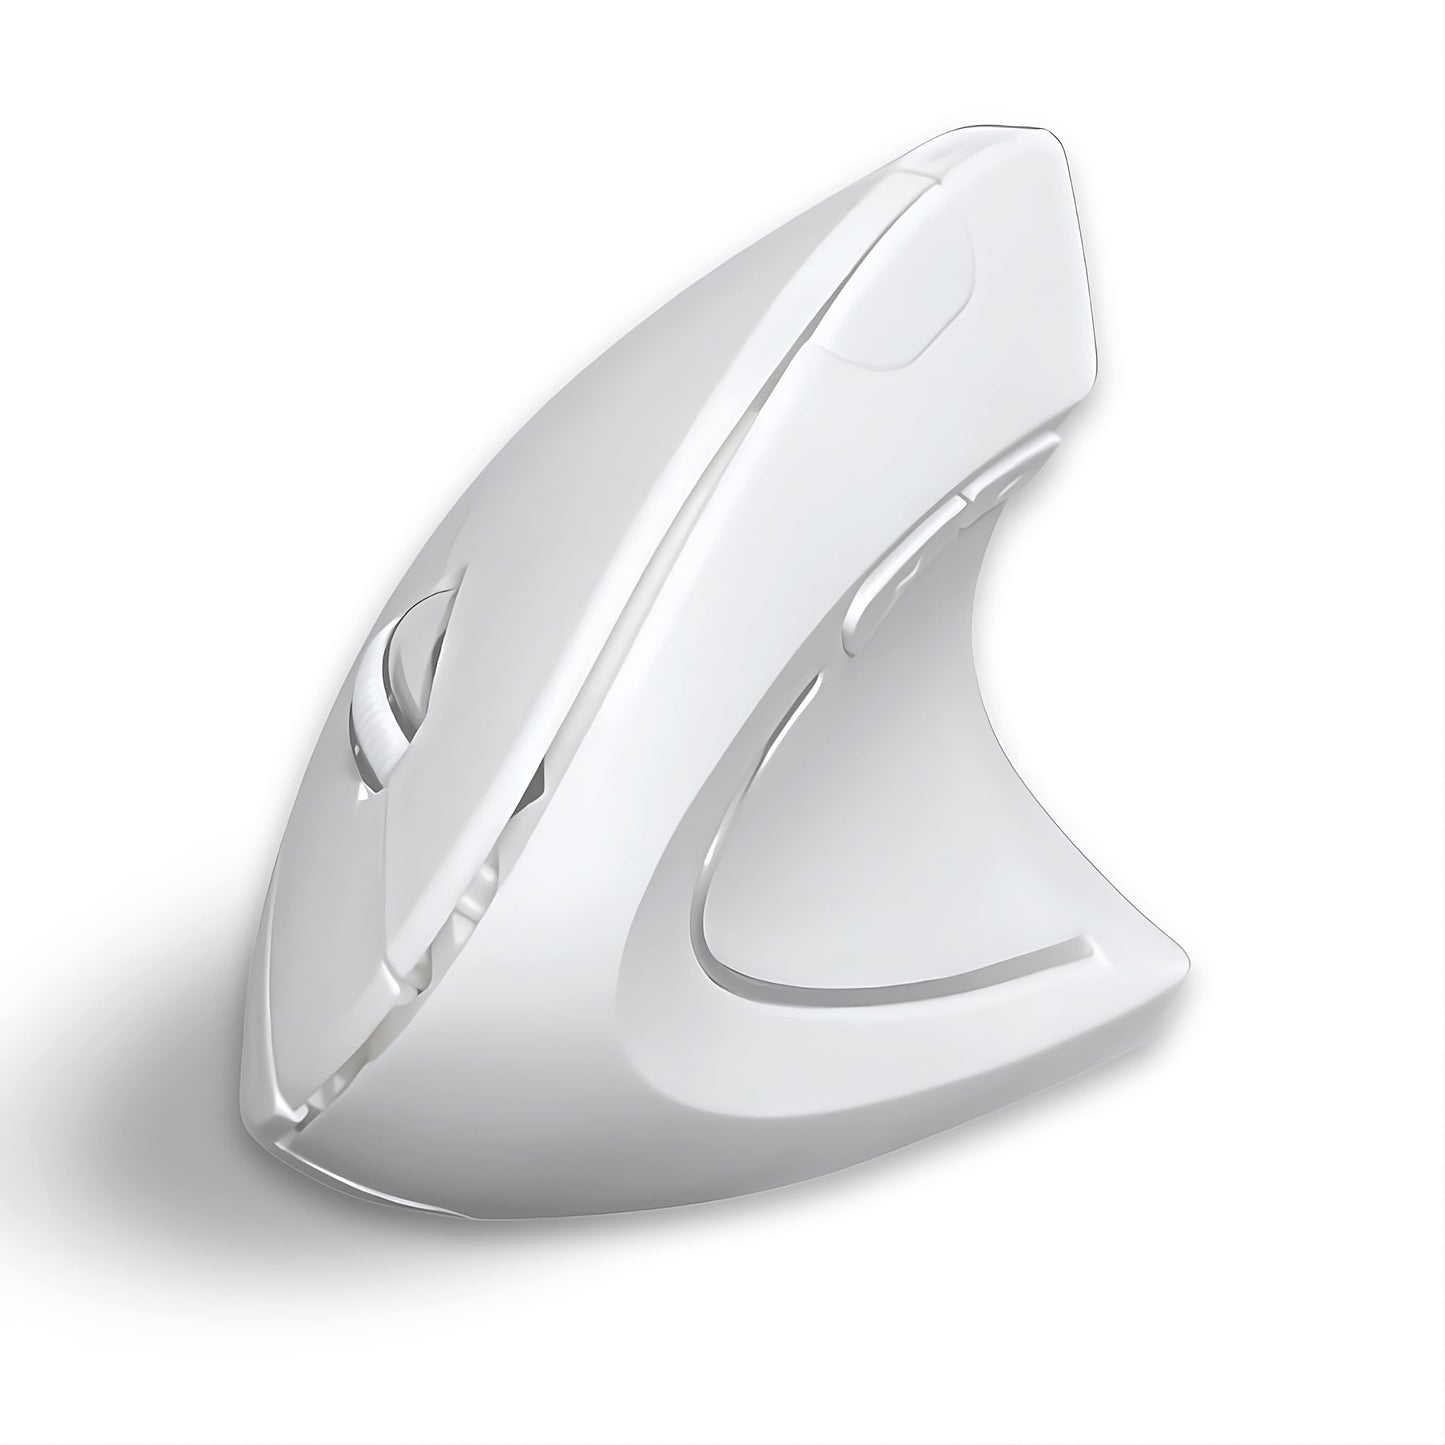 A Clevisco Wireless ergonomic Mouse featureing a ergonomic design, 5 buttons and DPI upto 1600